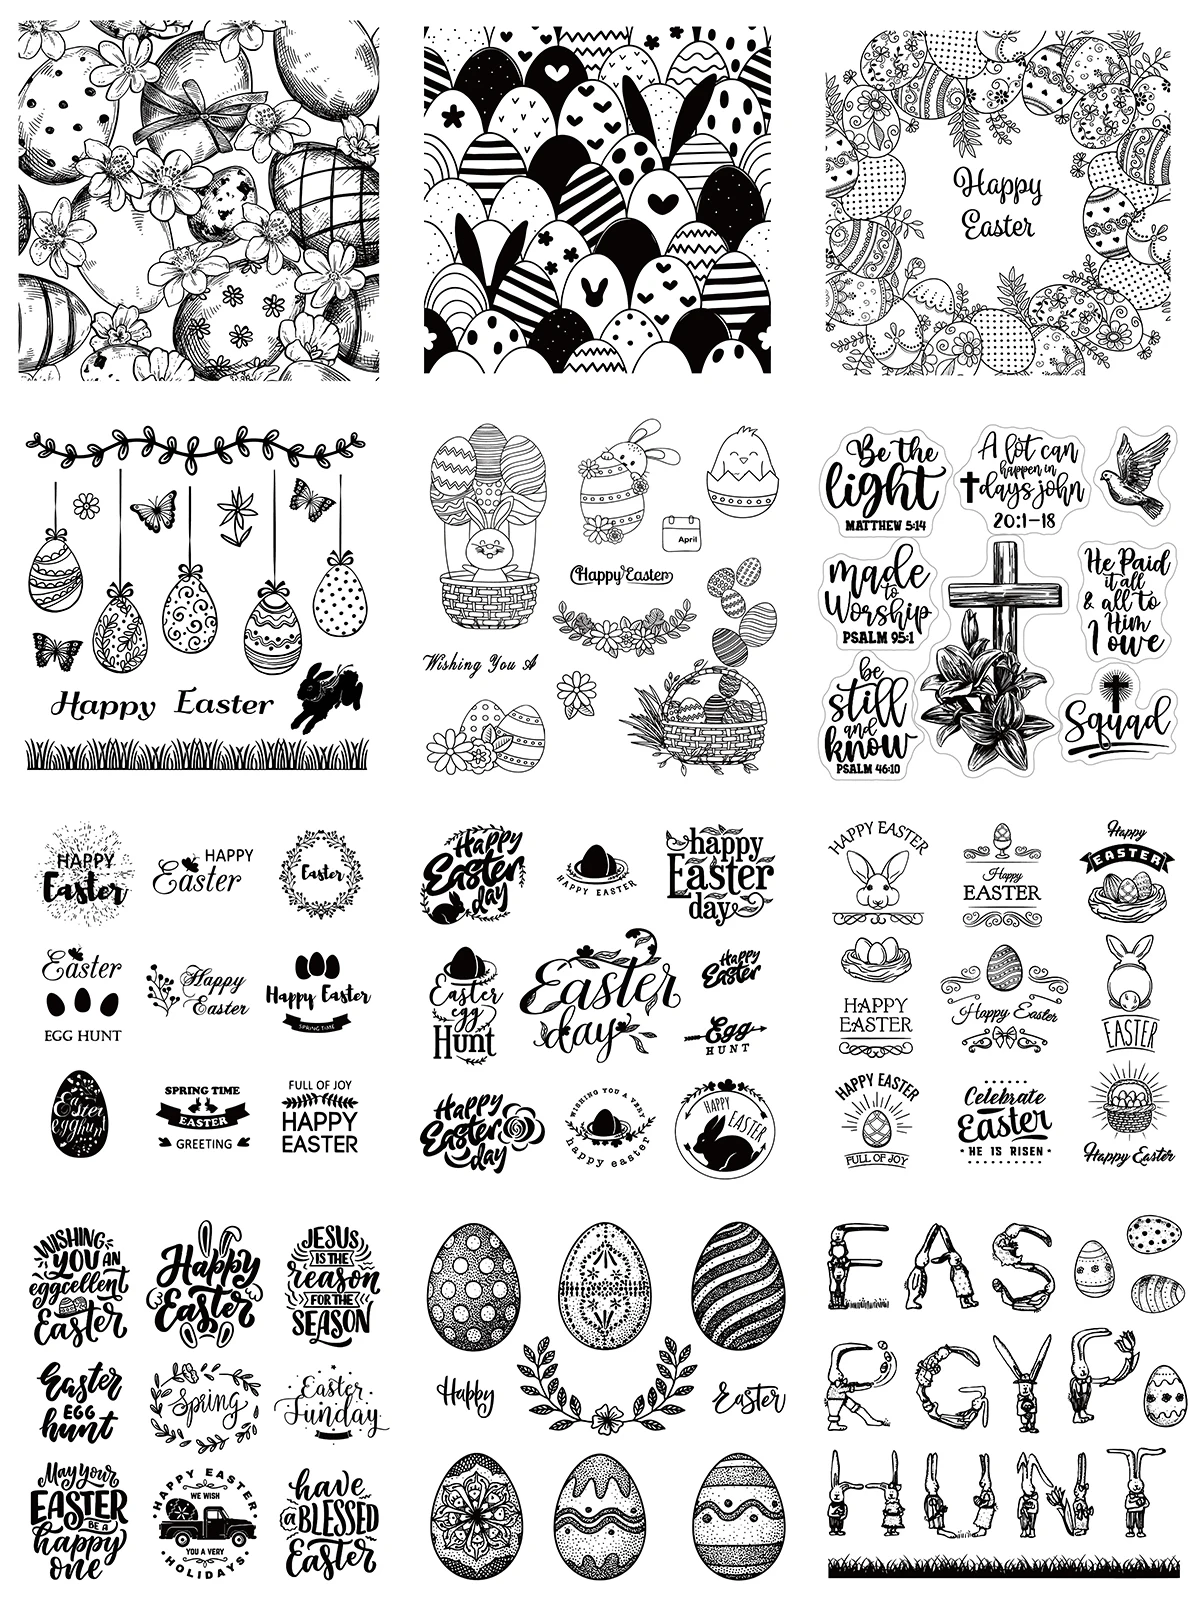 AZSG EASTER DAY Greetings|Eggs Clear Stamps/Seals For DIY Scrapbooking/Card Making/Album Decorative Fun Decoration Crafts